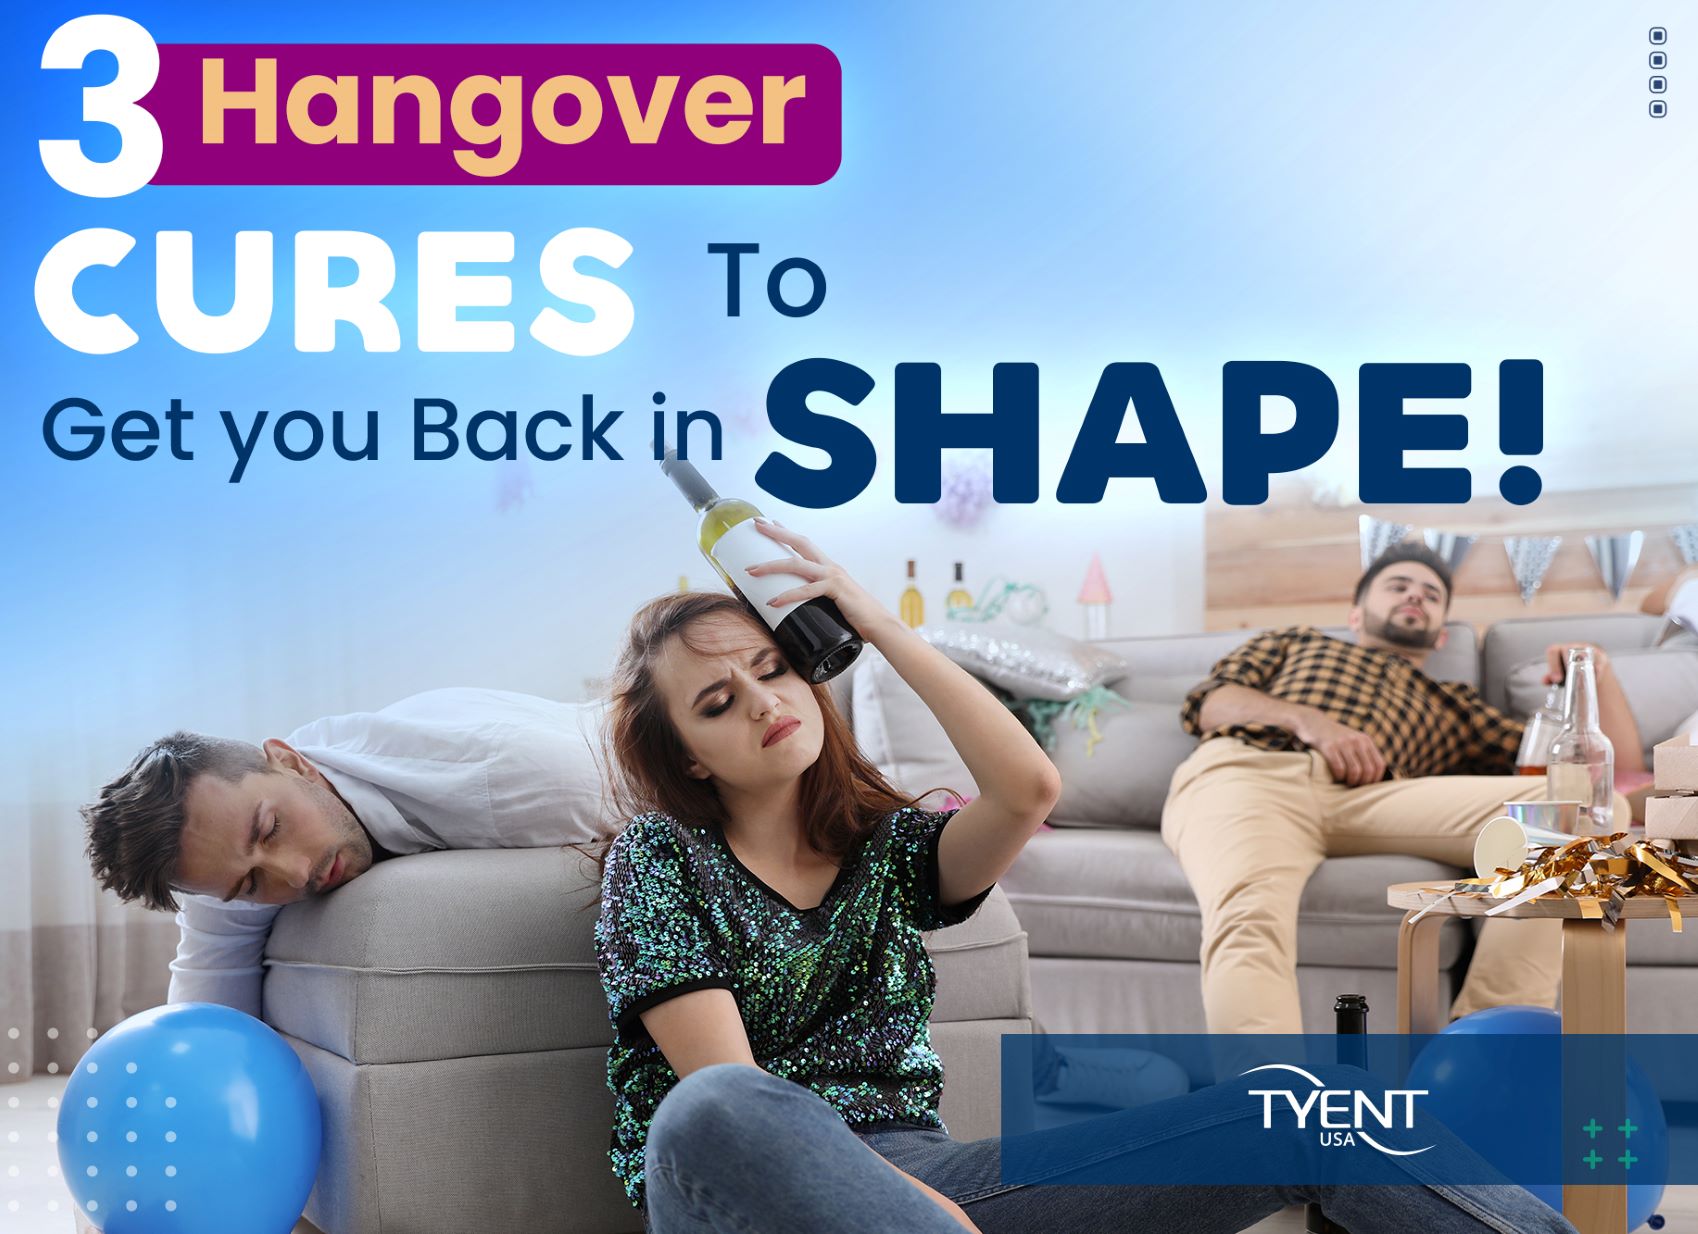 3 Hangover CURES To Get You Back in Shape!